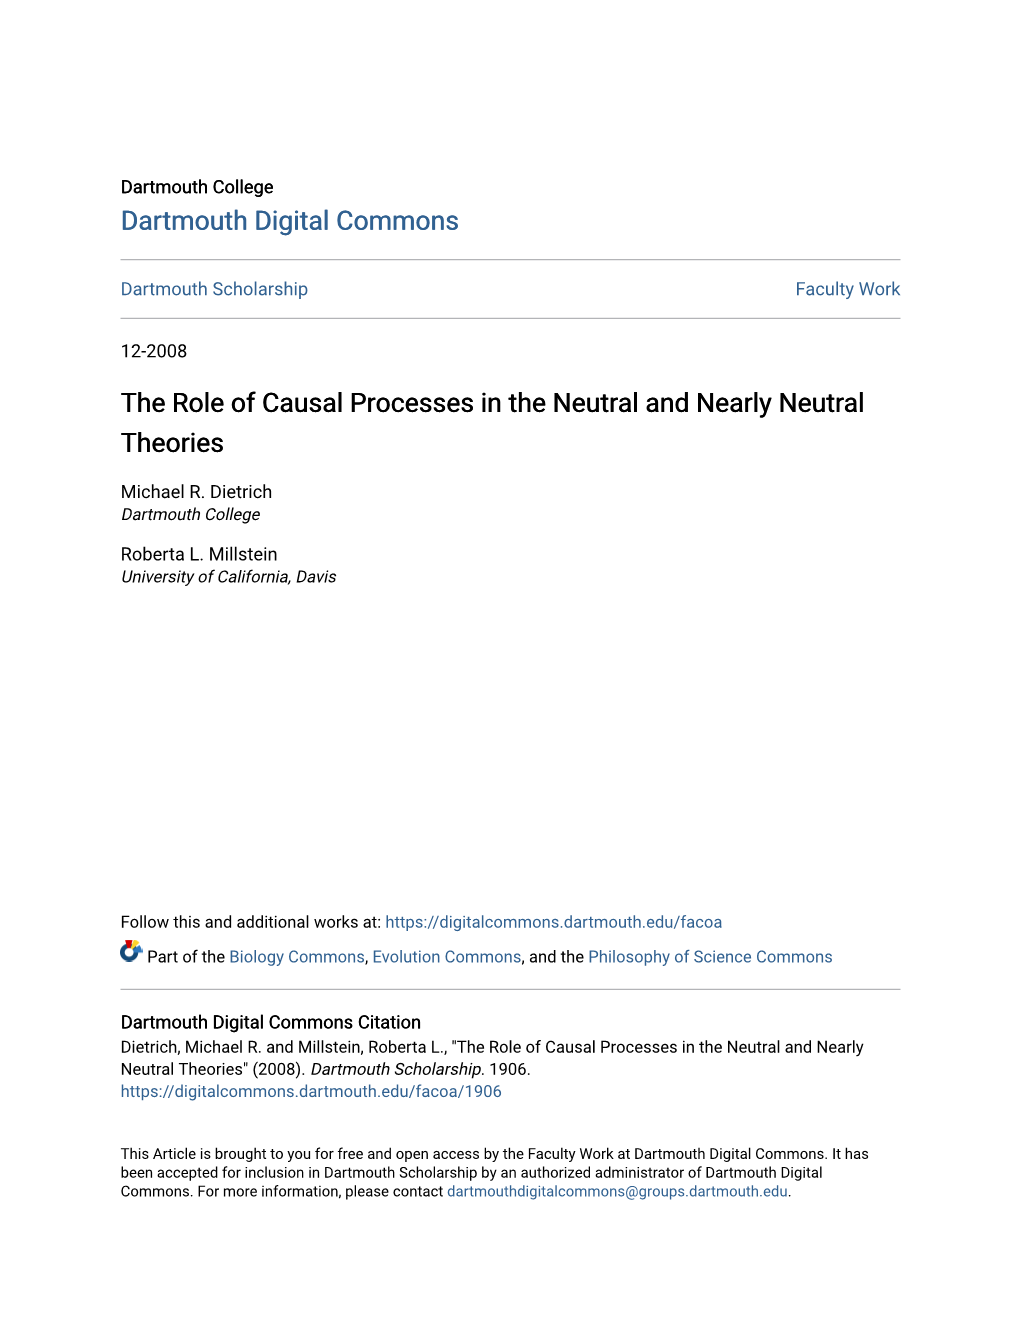 The Role of Causal Processes in the Neutral and Nearly Neutral Theories